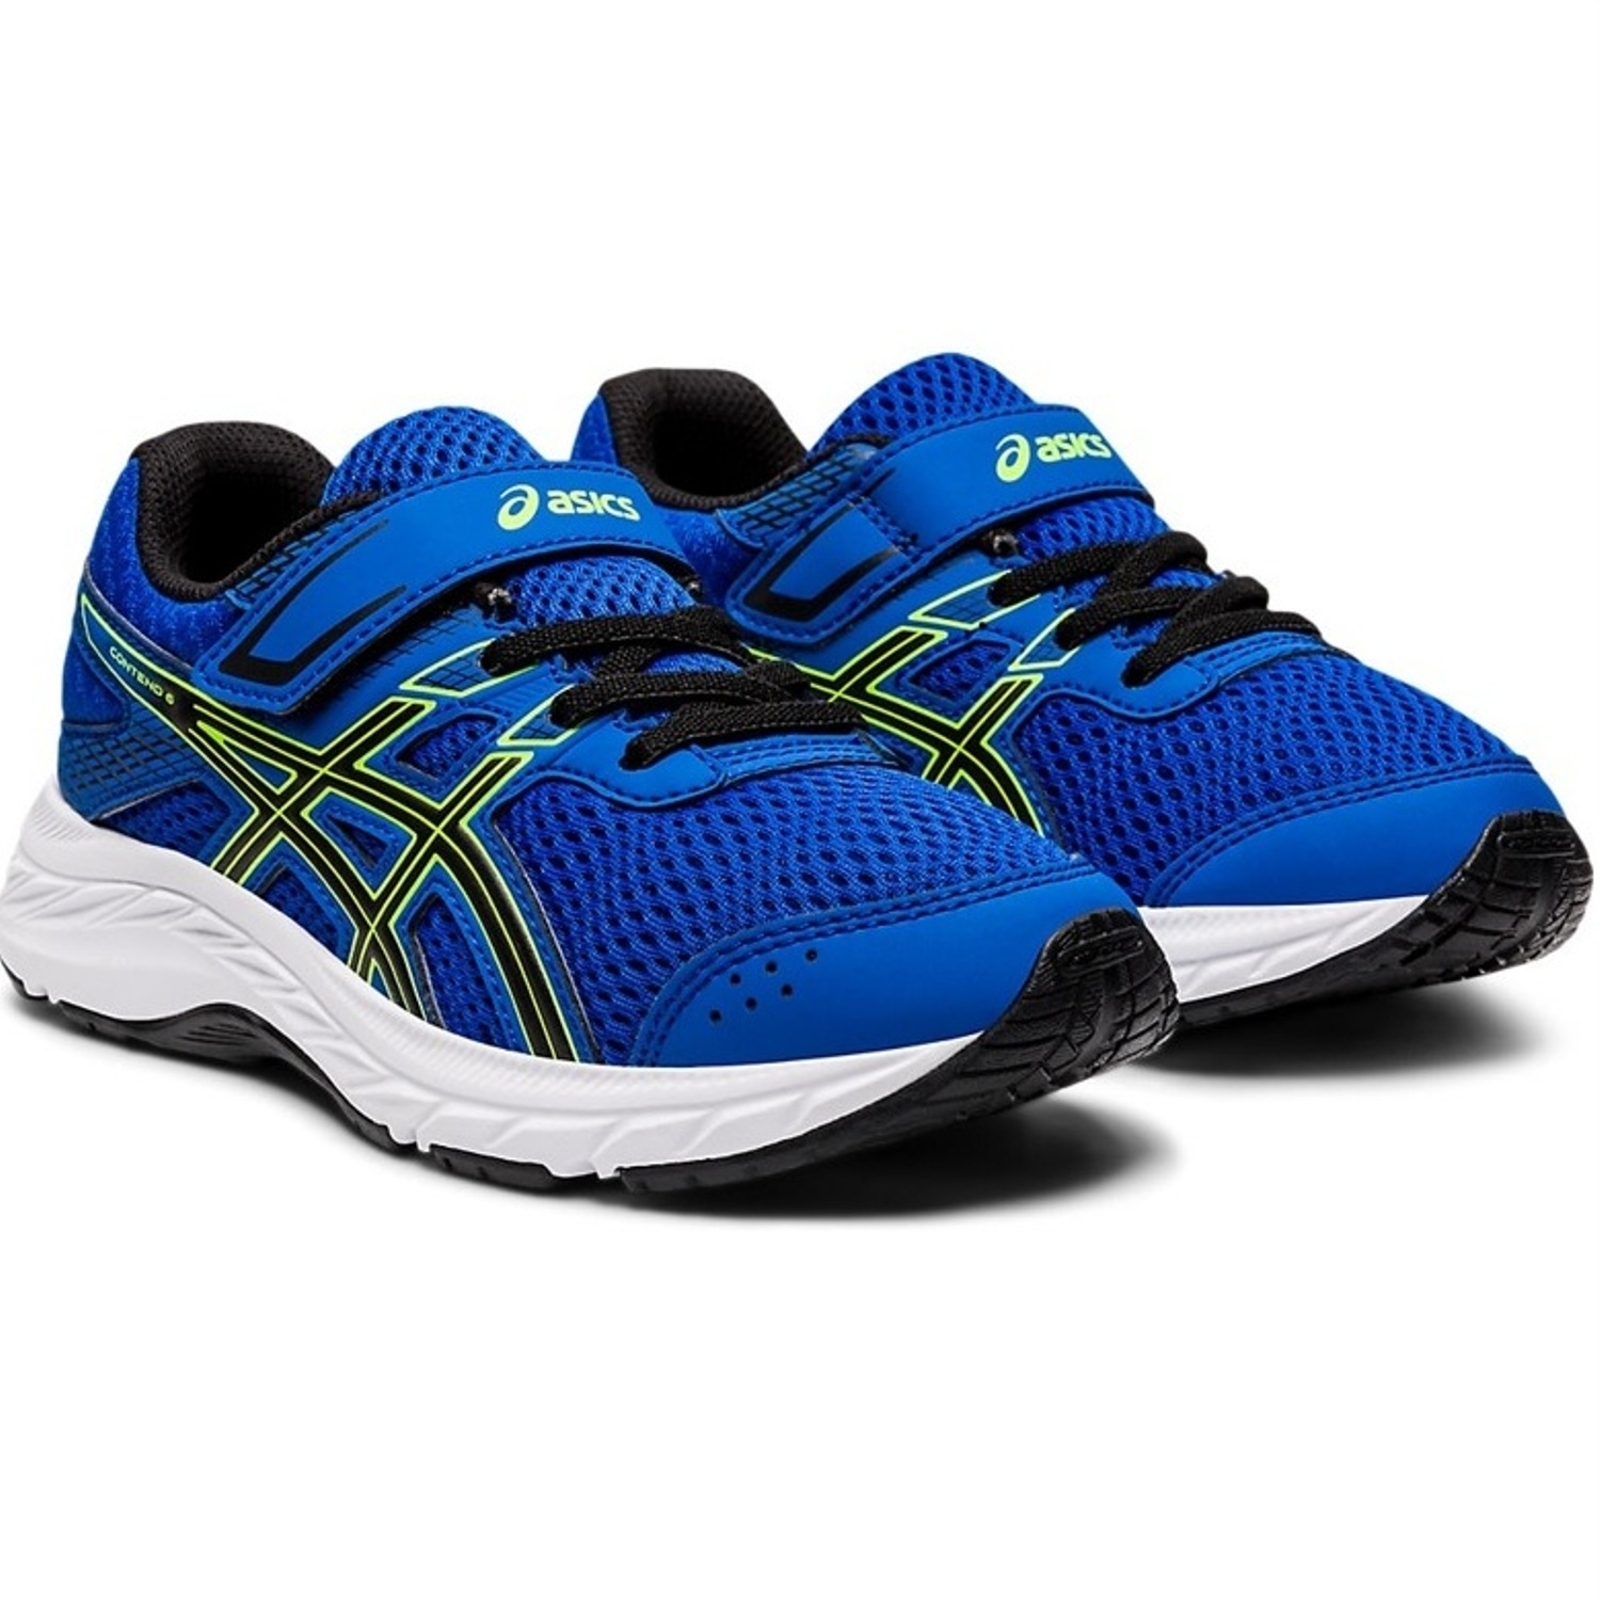 Asics Contend 6 PS Boys Running Shoes 